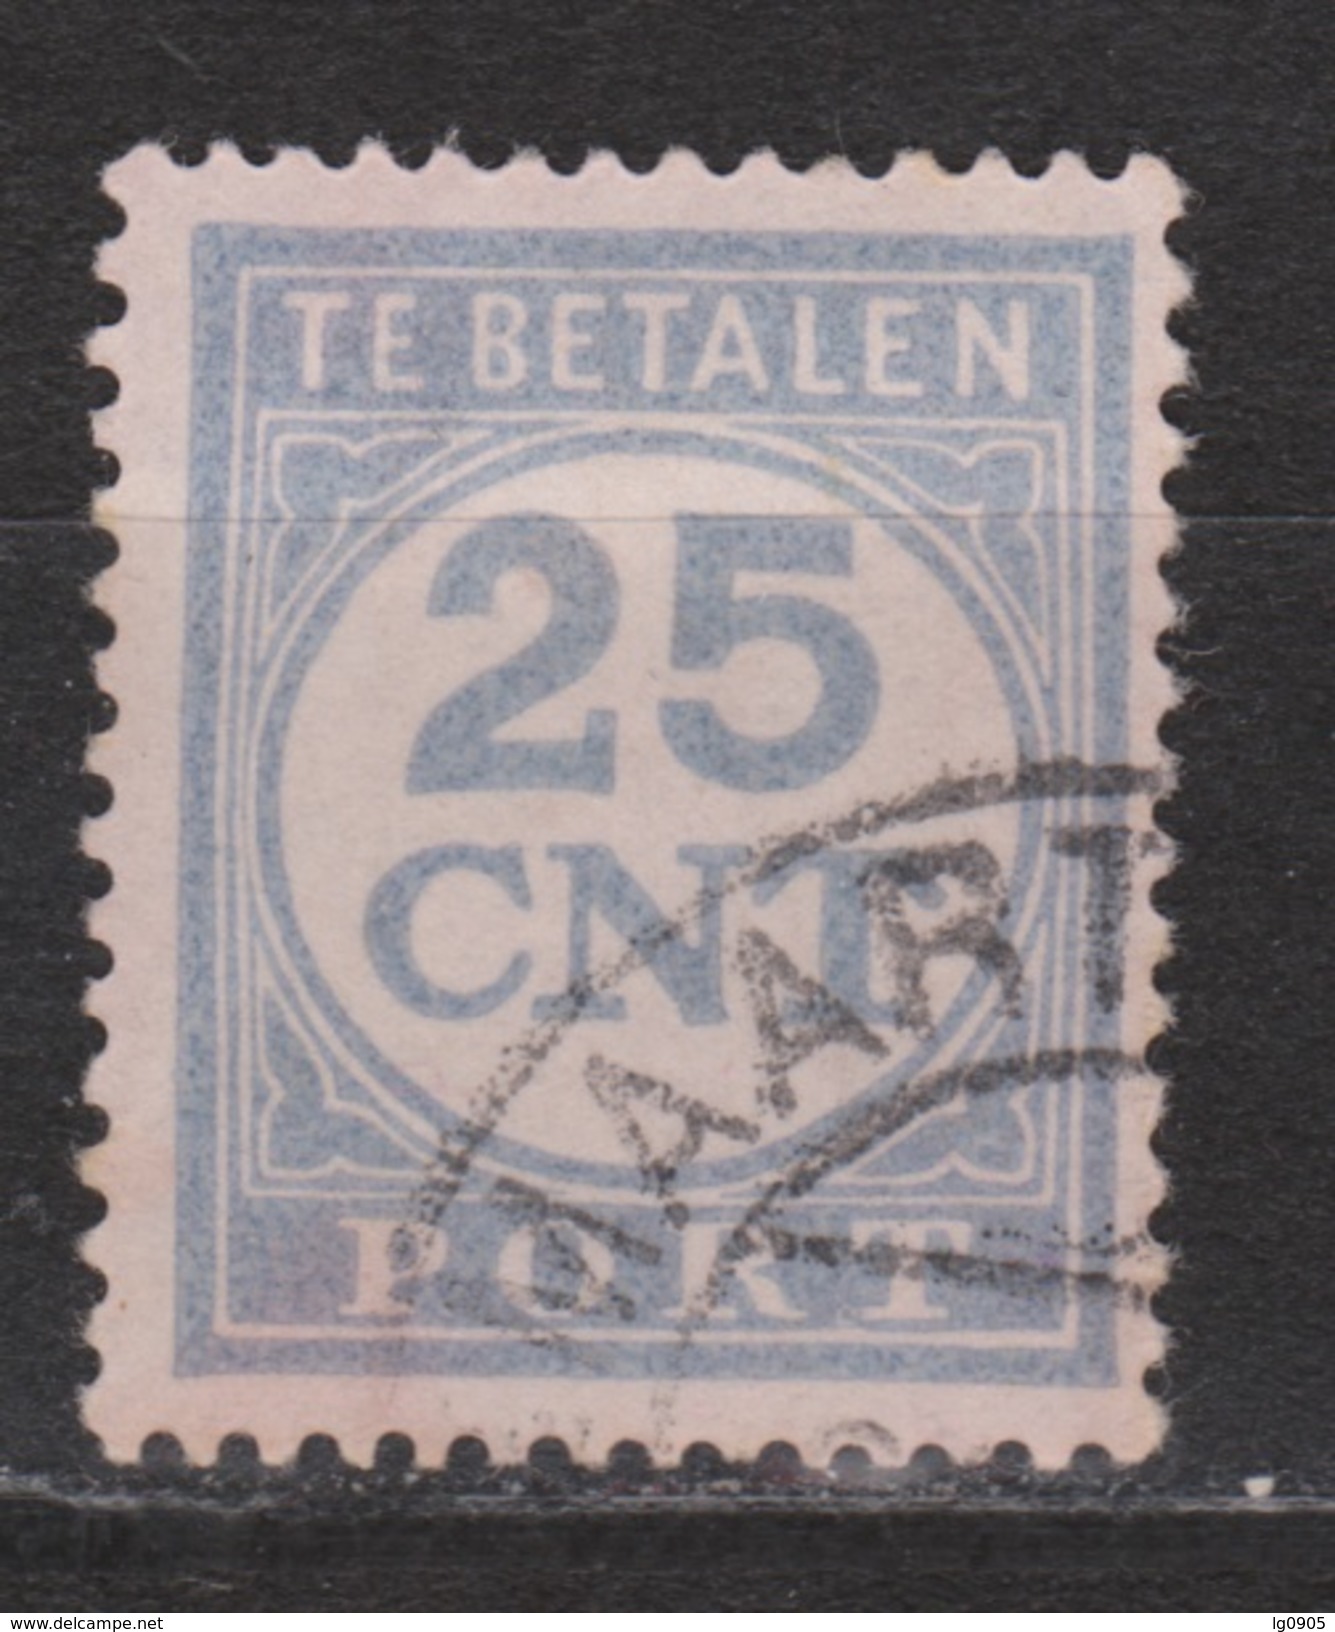 NVPH Nederland Netherlands Holanda Pays Bas Port 77 Used Timbre-taxe Postmarke Sellos De Correos NOW MANY DUE STAMPS - Impuestos